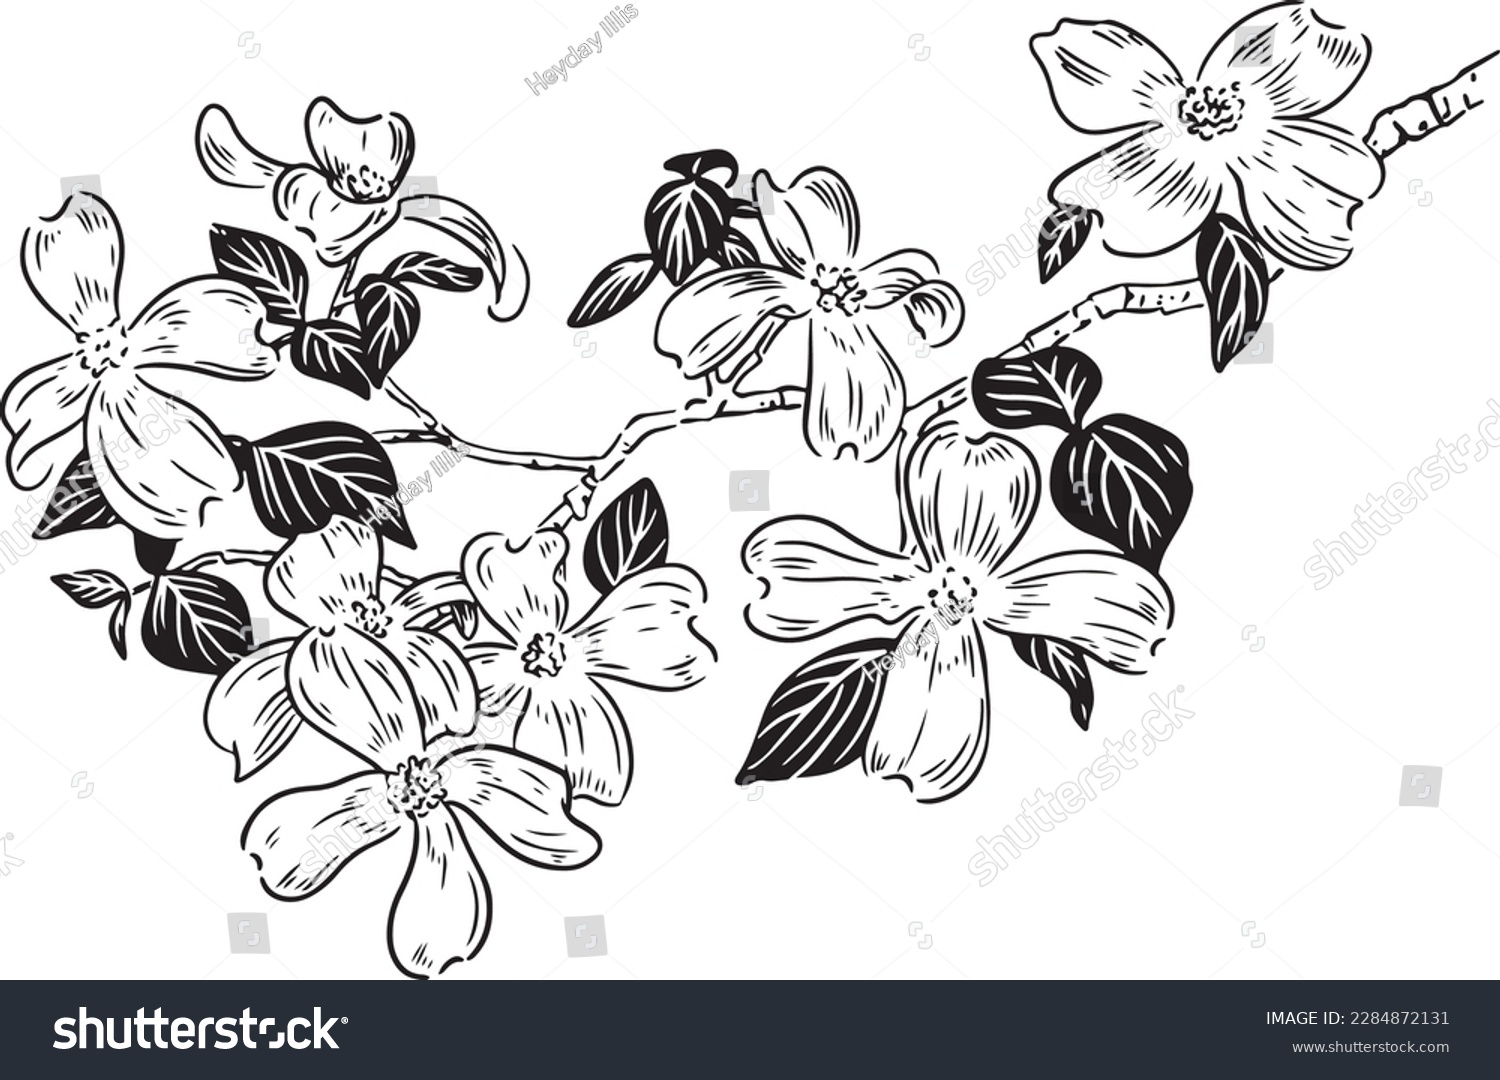 SVG of Dogwood Flowers on Branch black and white pen and ink line drawing illustration vector spot clip art  svg